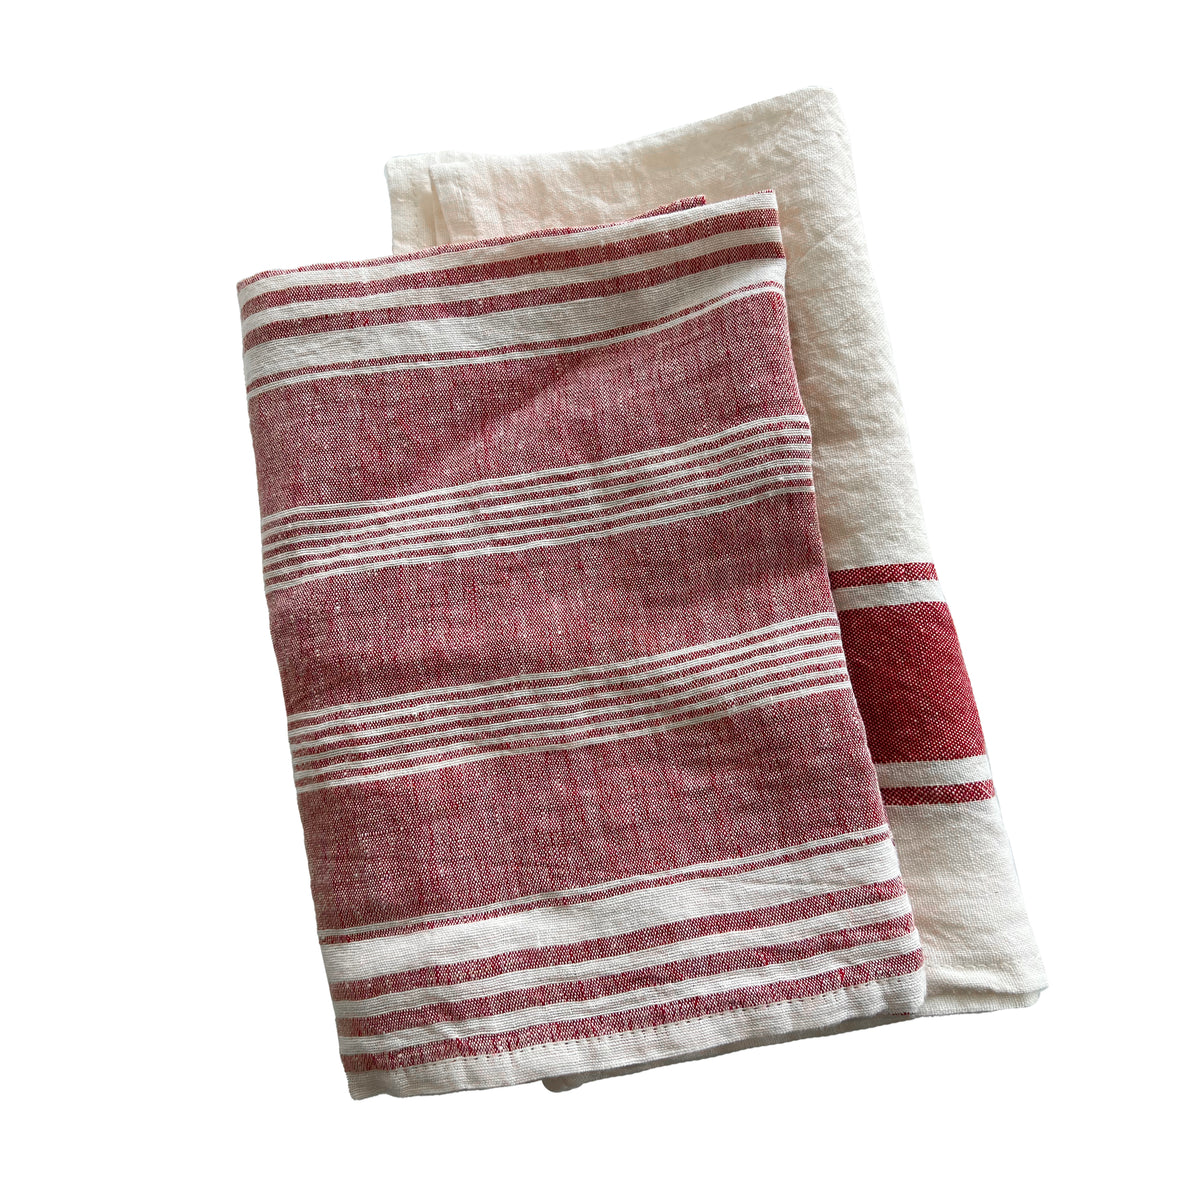 Set of 2 soft Italian Linen Kitchen Towels, Trattoria Rosso, in Red and White from Caskata